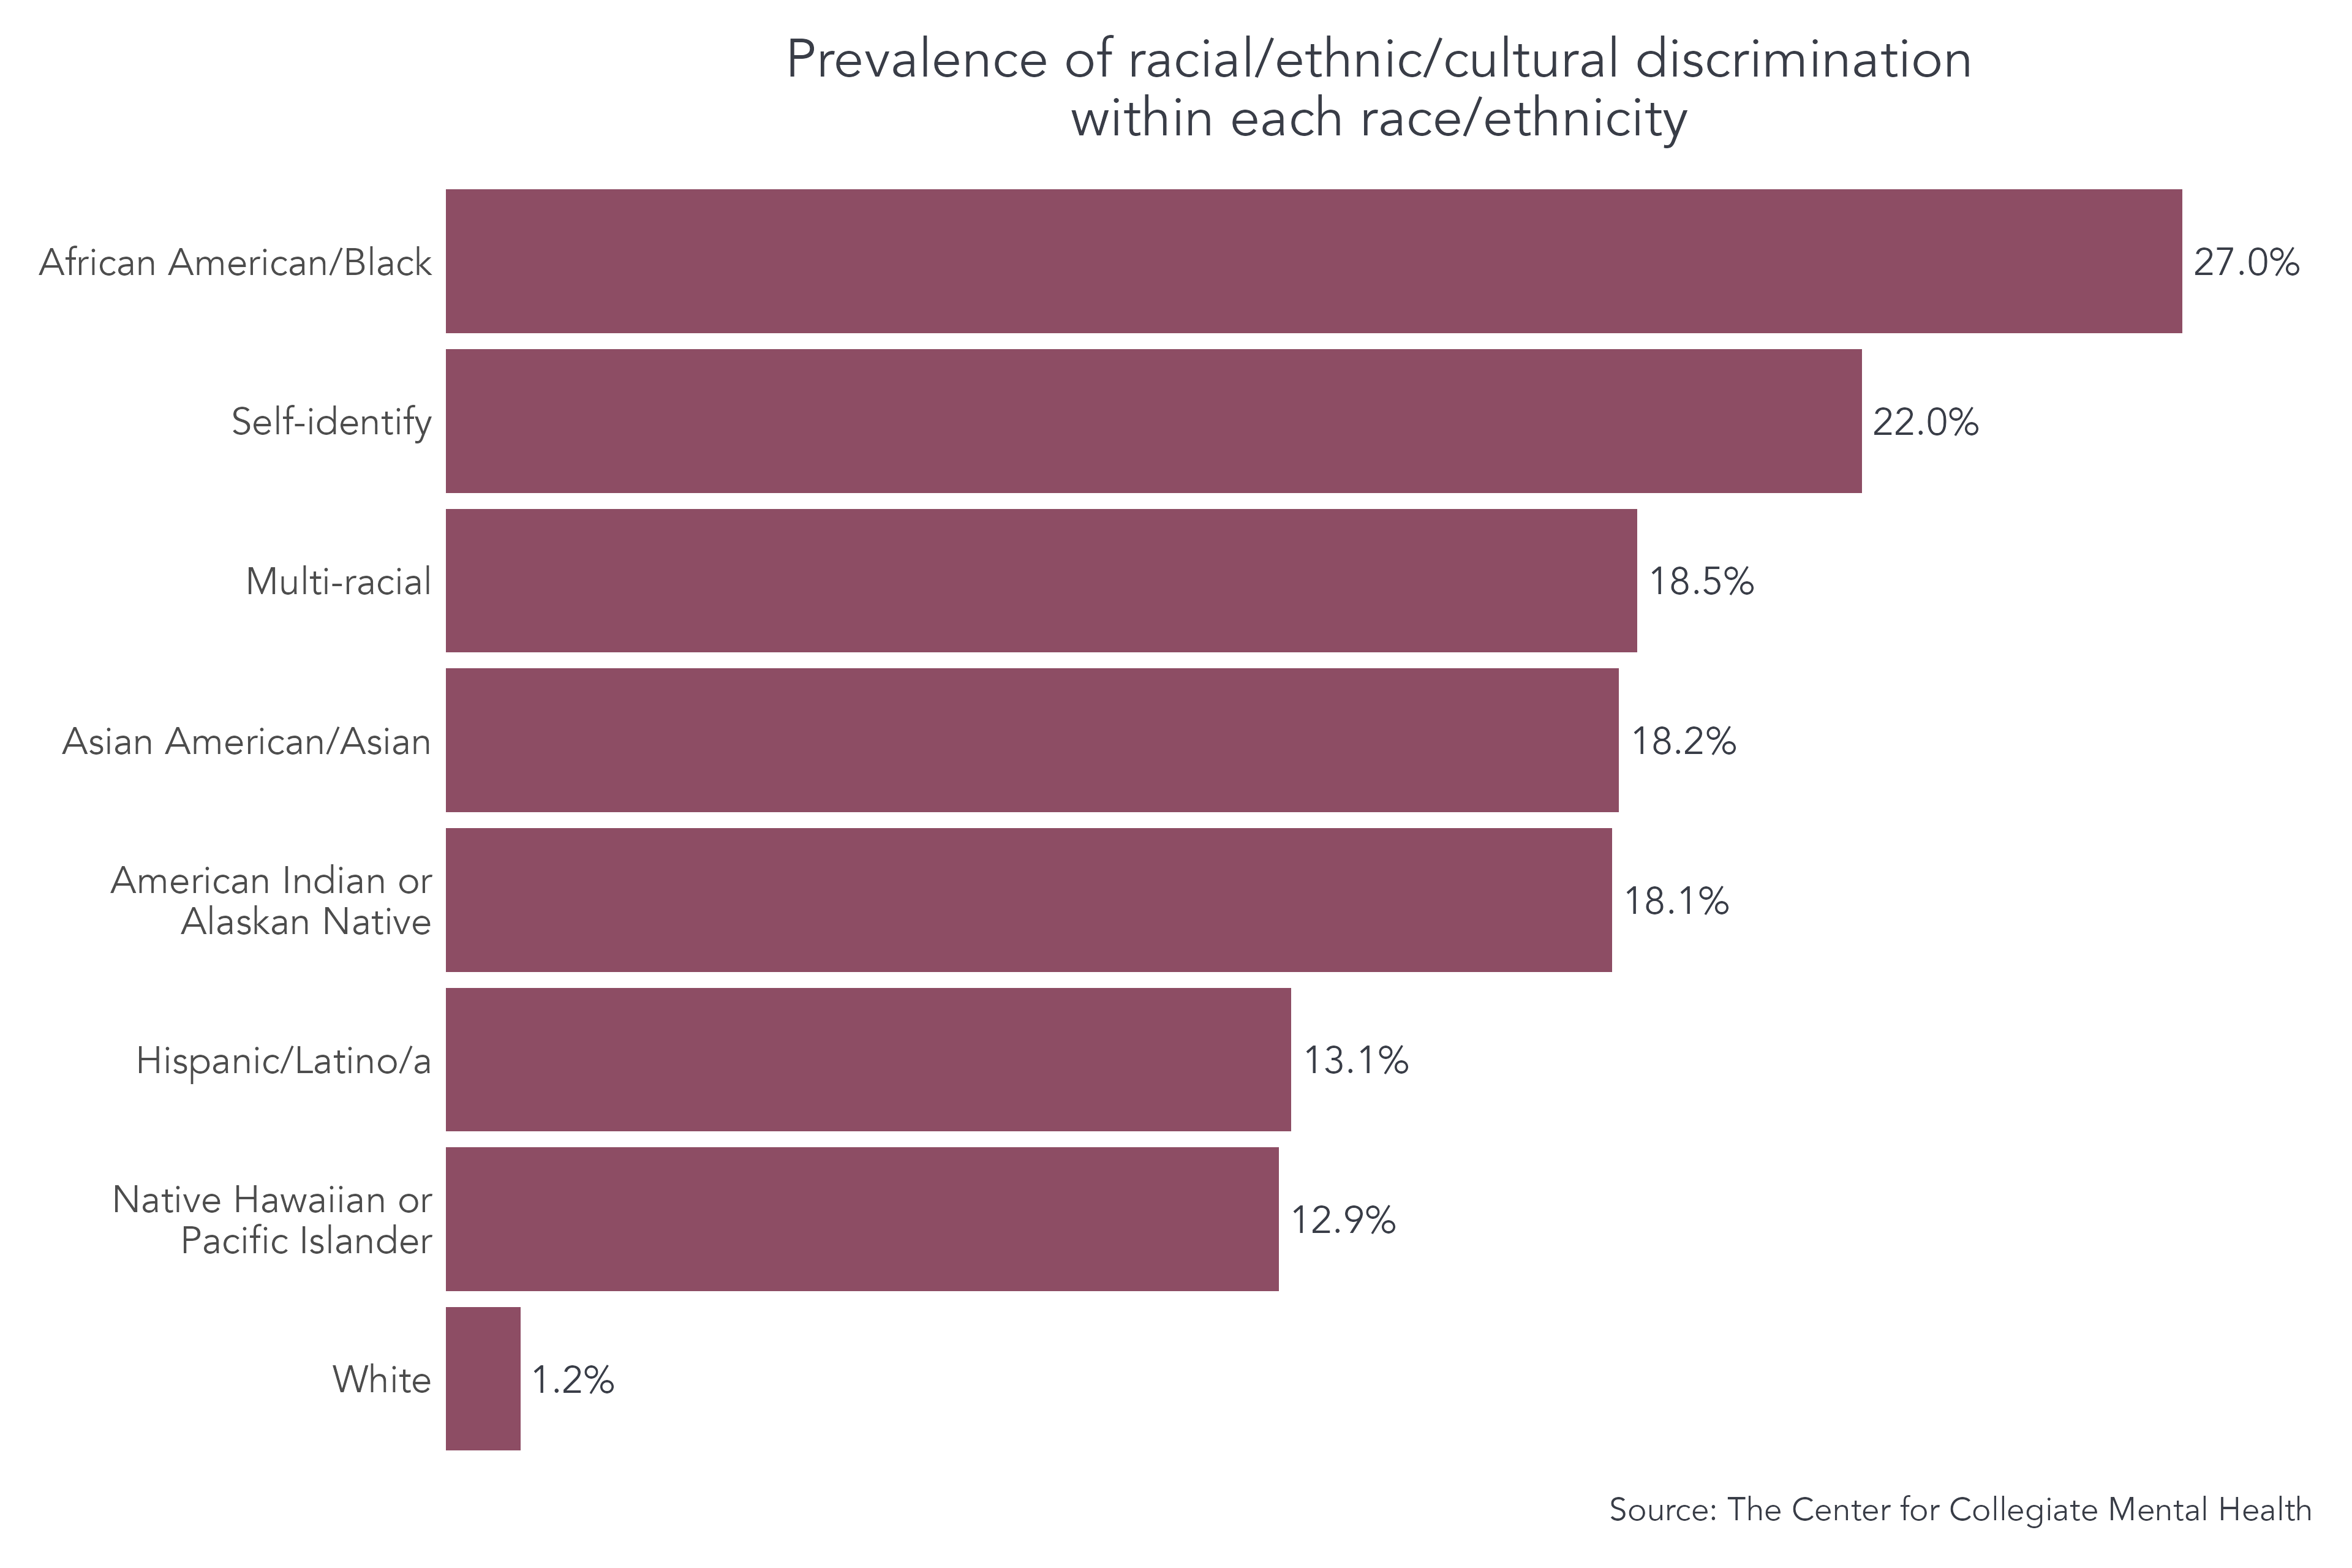 African American/Black students experienced the highest percentage of race/ethnicity/culture discrimination at 27%, followed by self-identify (22%) and multi-racial (18.5%). Similar to findings from previous research (Bravo et al., 2023; Lee et al., 2019), white students demonstrated the lowest rates of discrimination (1.2%).  